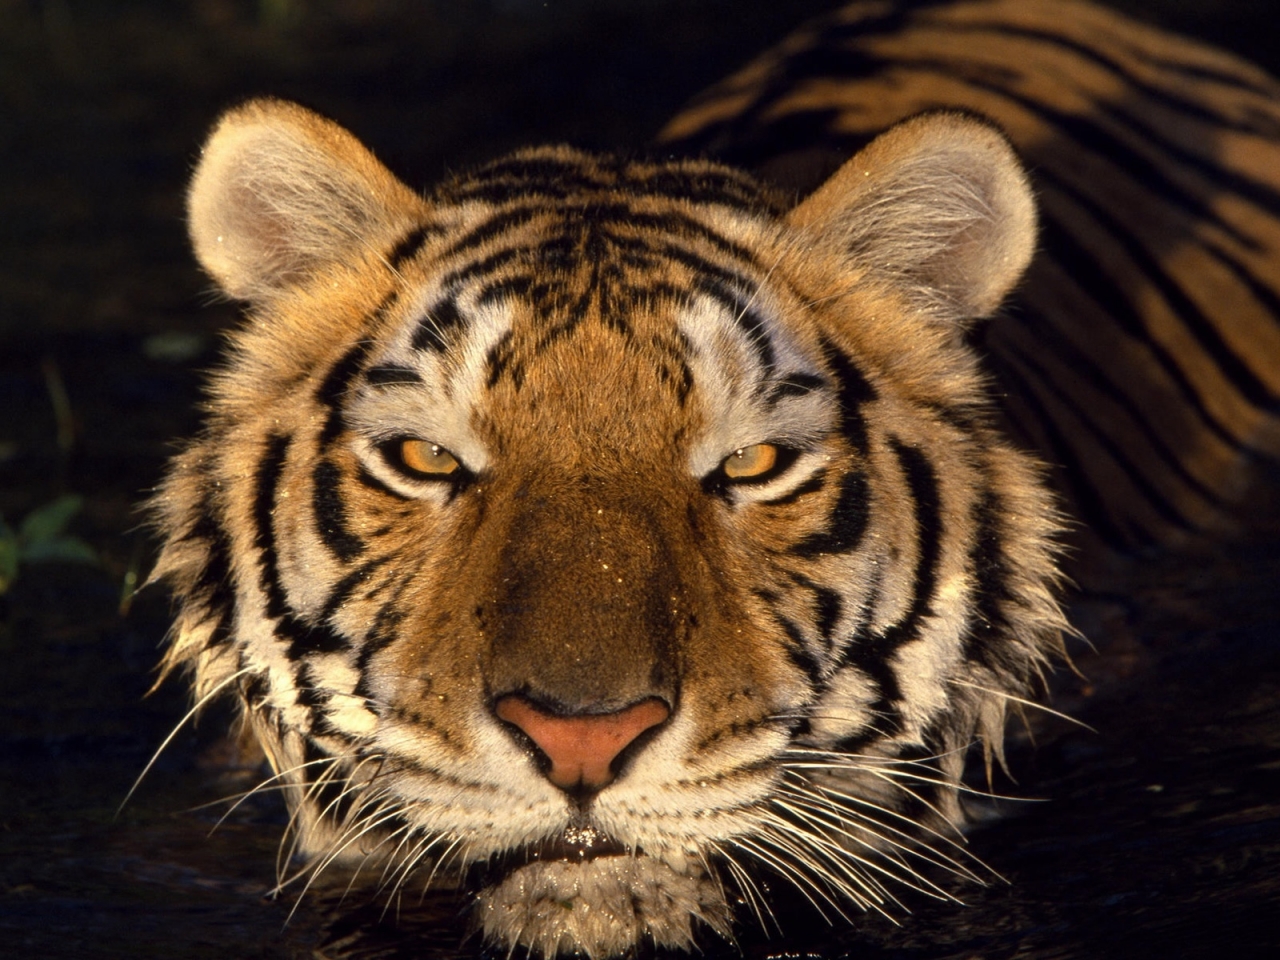 Tiger Head for 1280 x 960 resolution